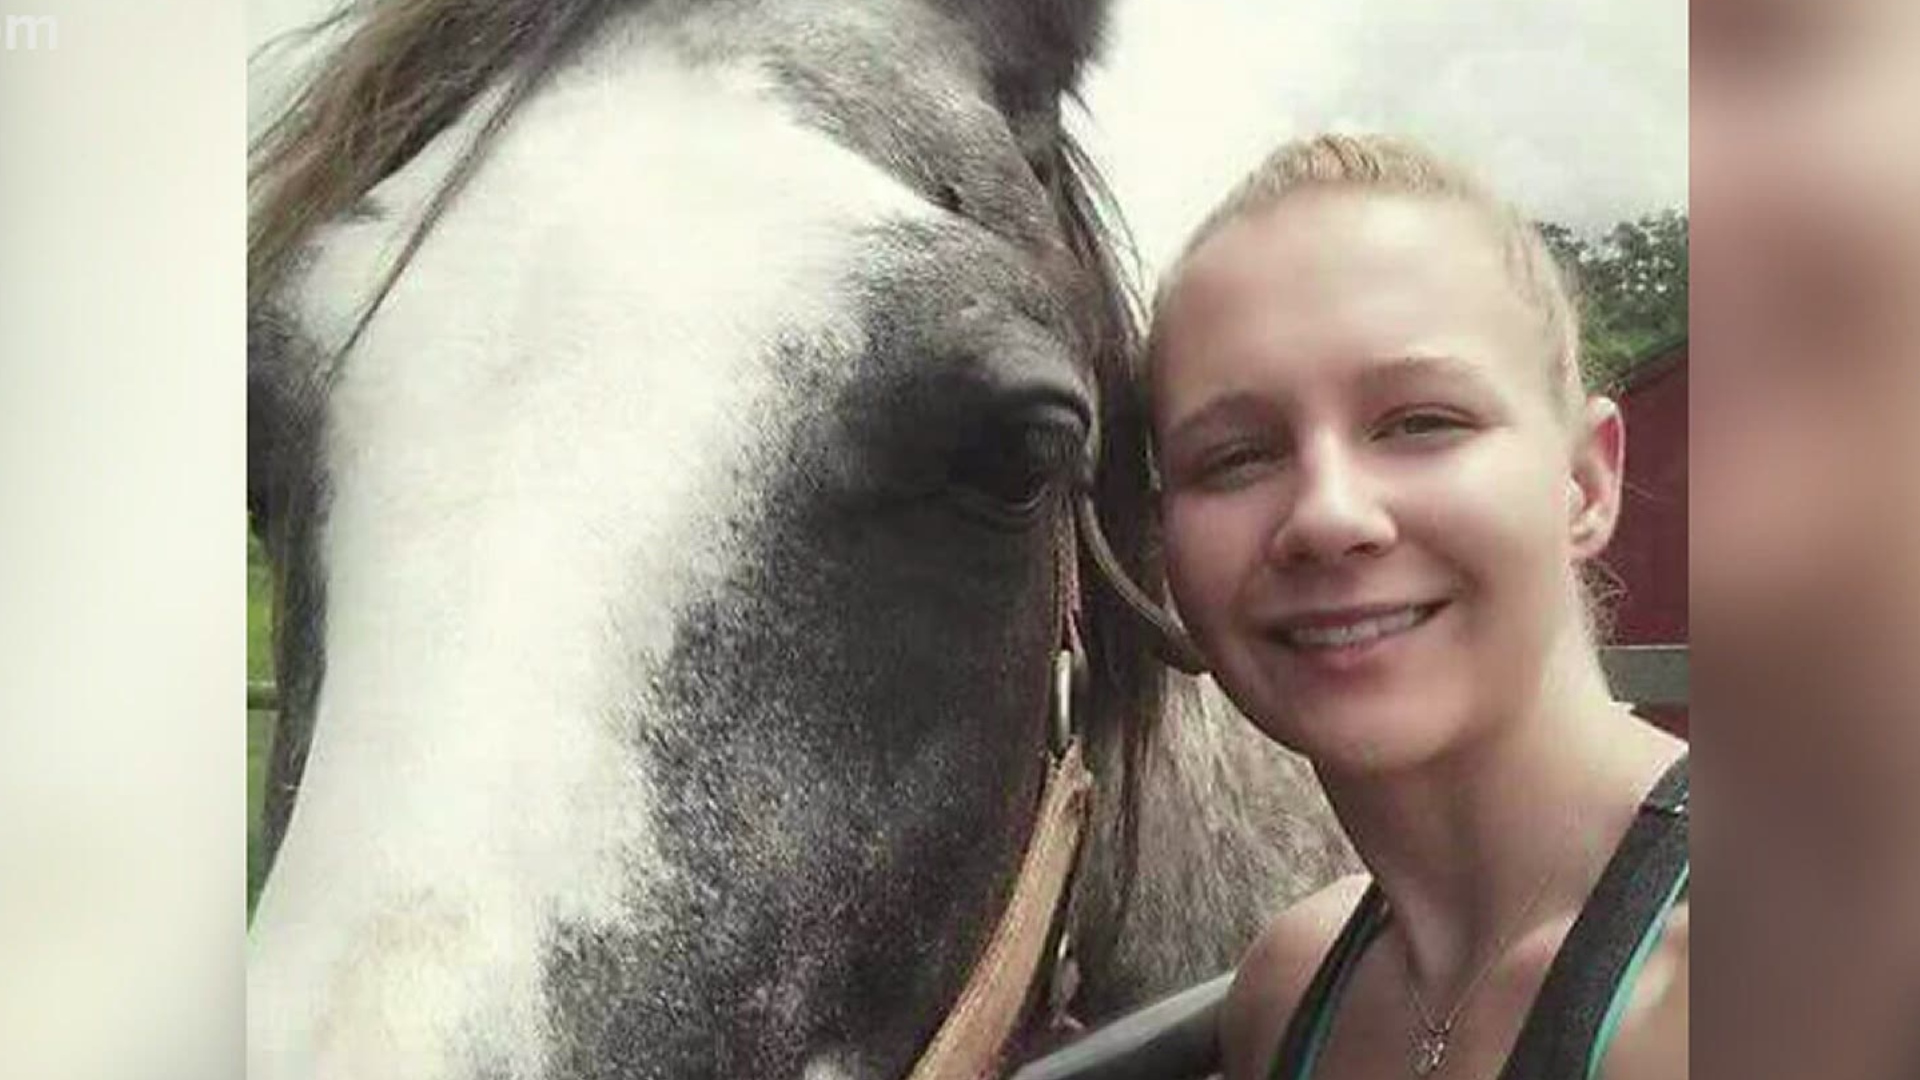 Reality Winner, a Kingsville native and a former Air Force intelligence specialist pled guilty a few years ago to leaking classified information.